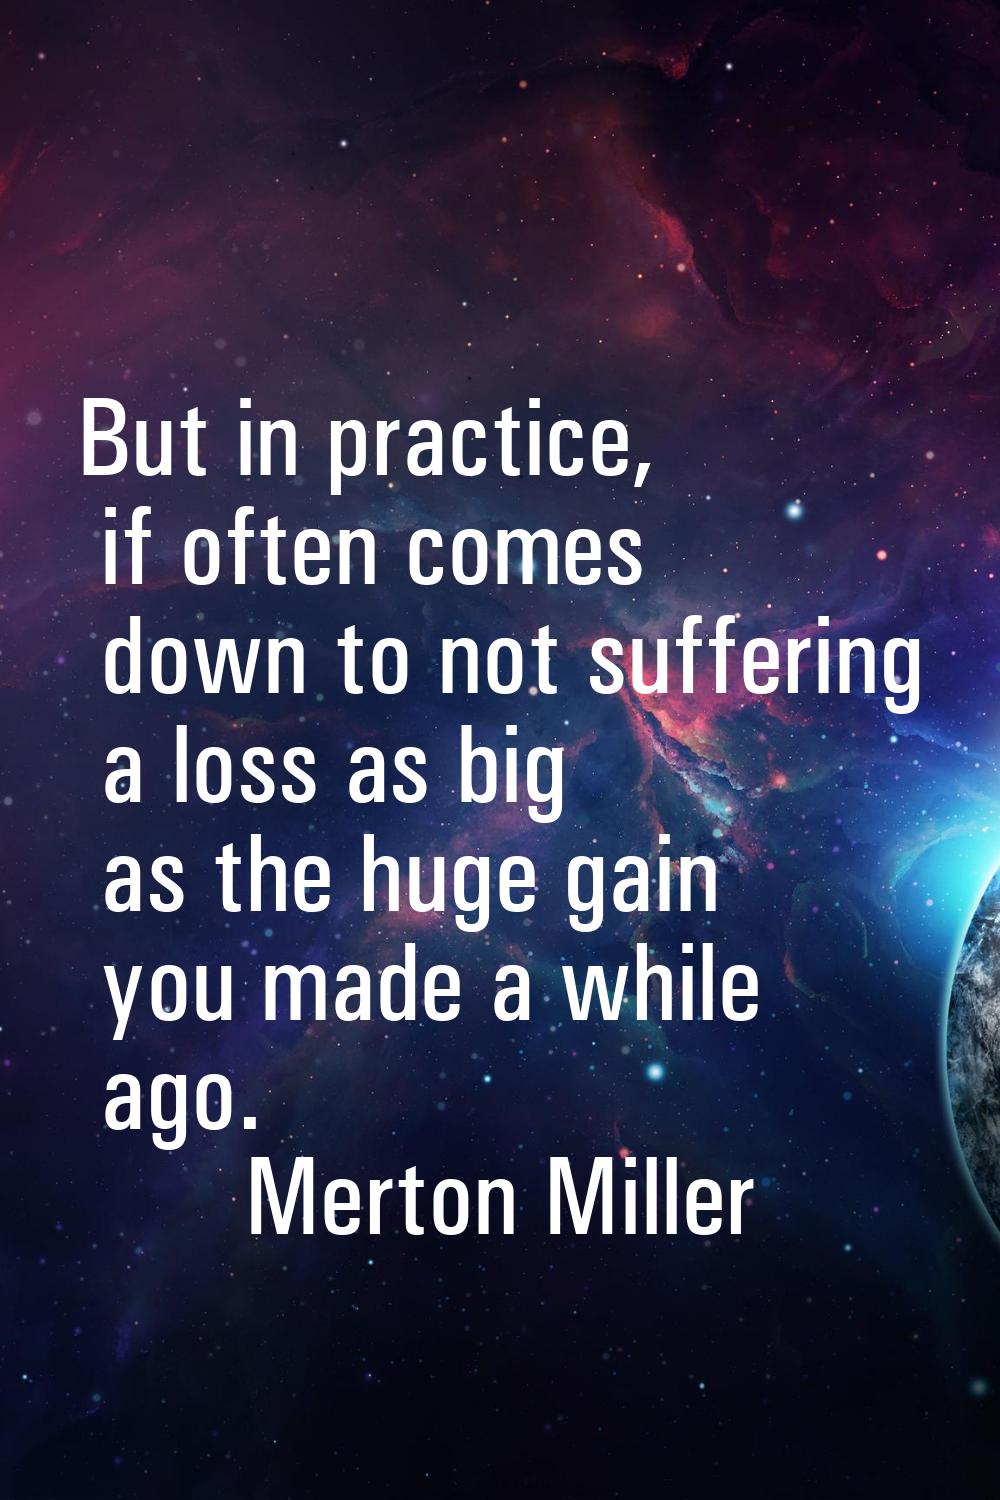 But in practice, if often comes down to not suffering a loss as big as the huge gain you made a whi